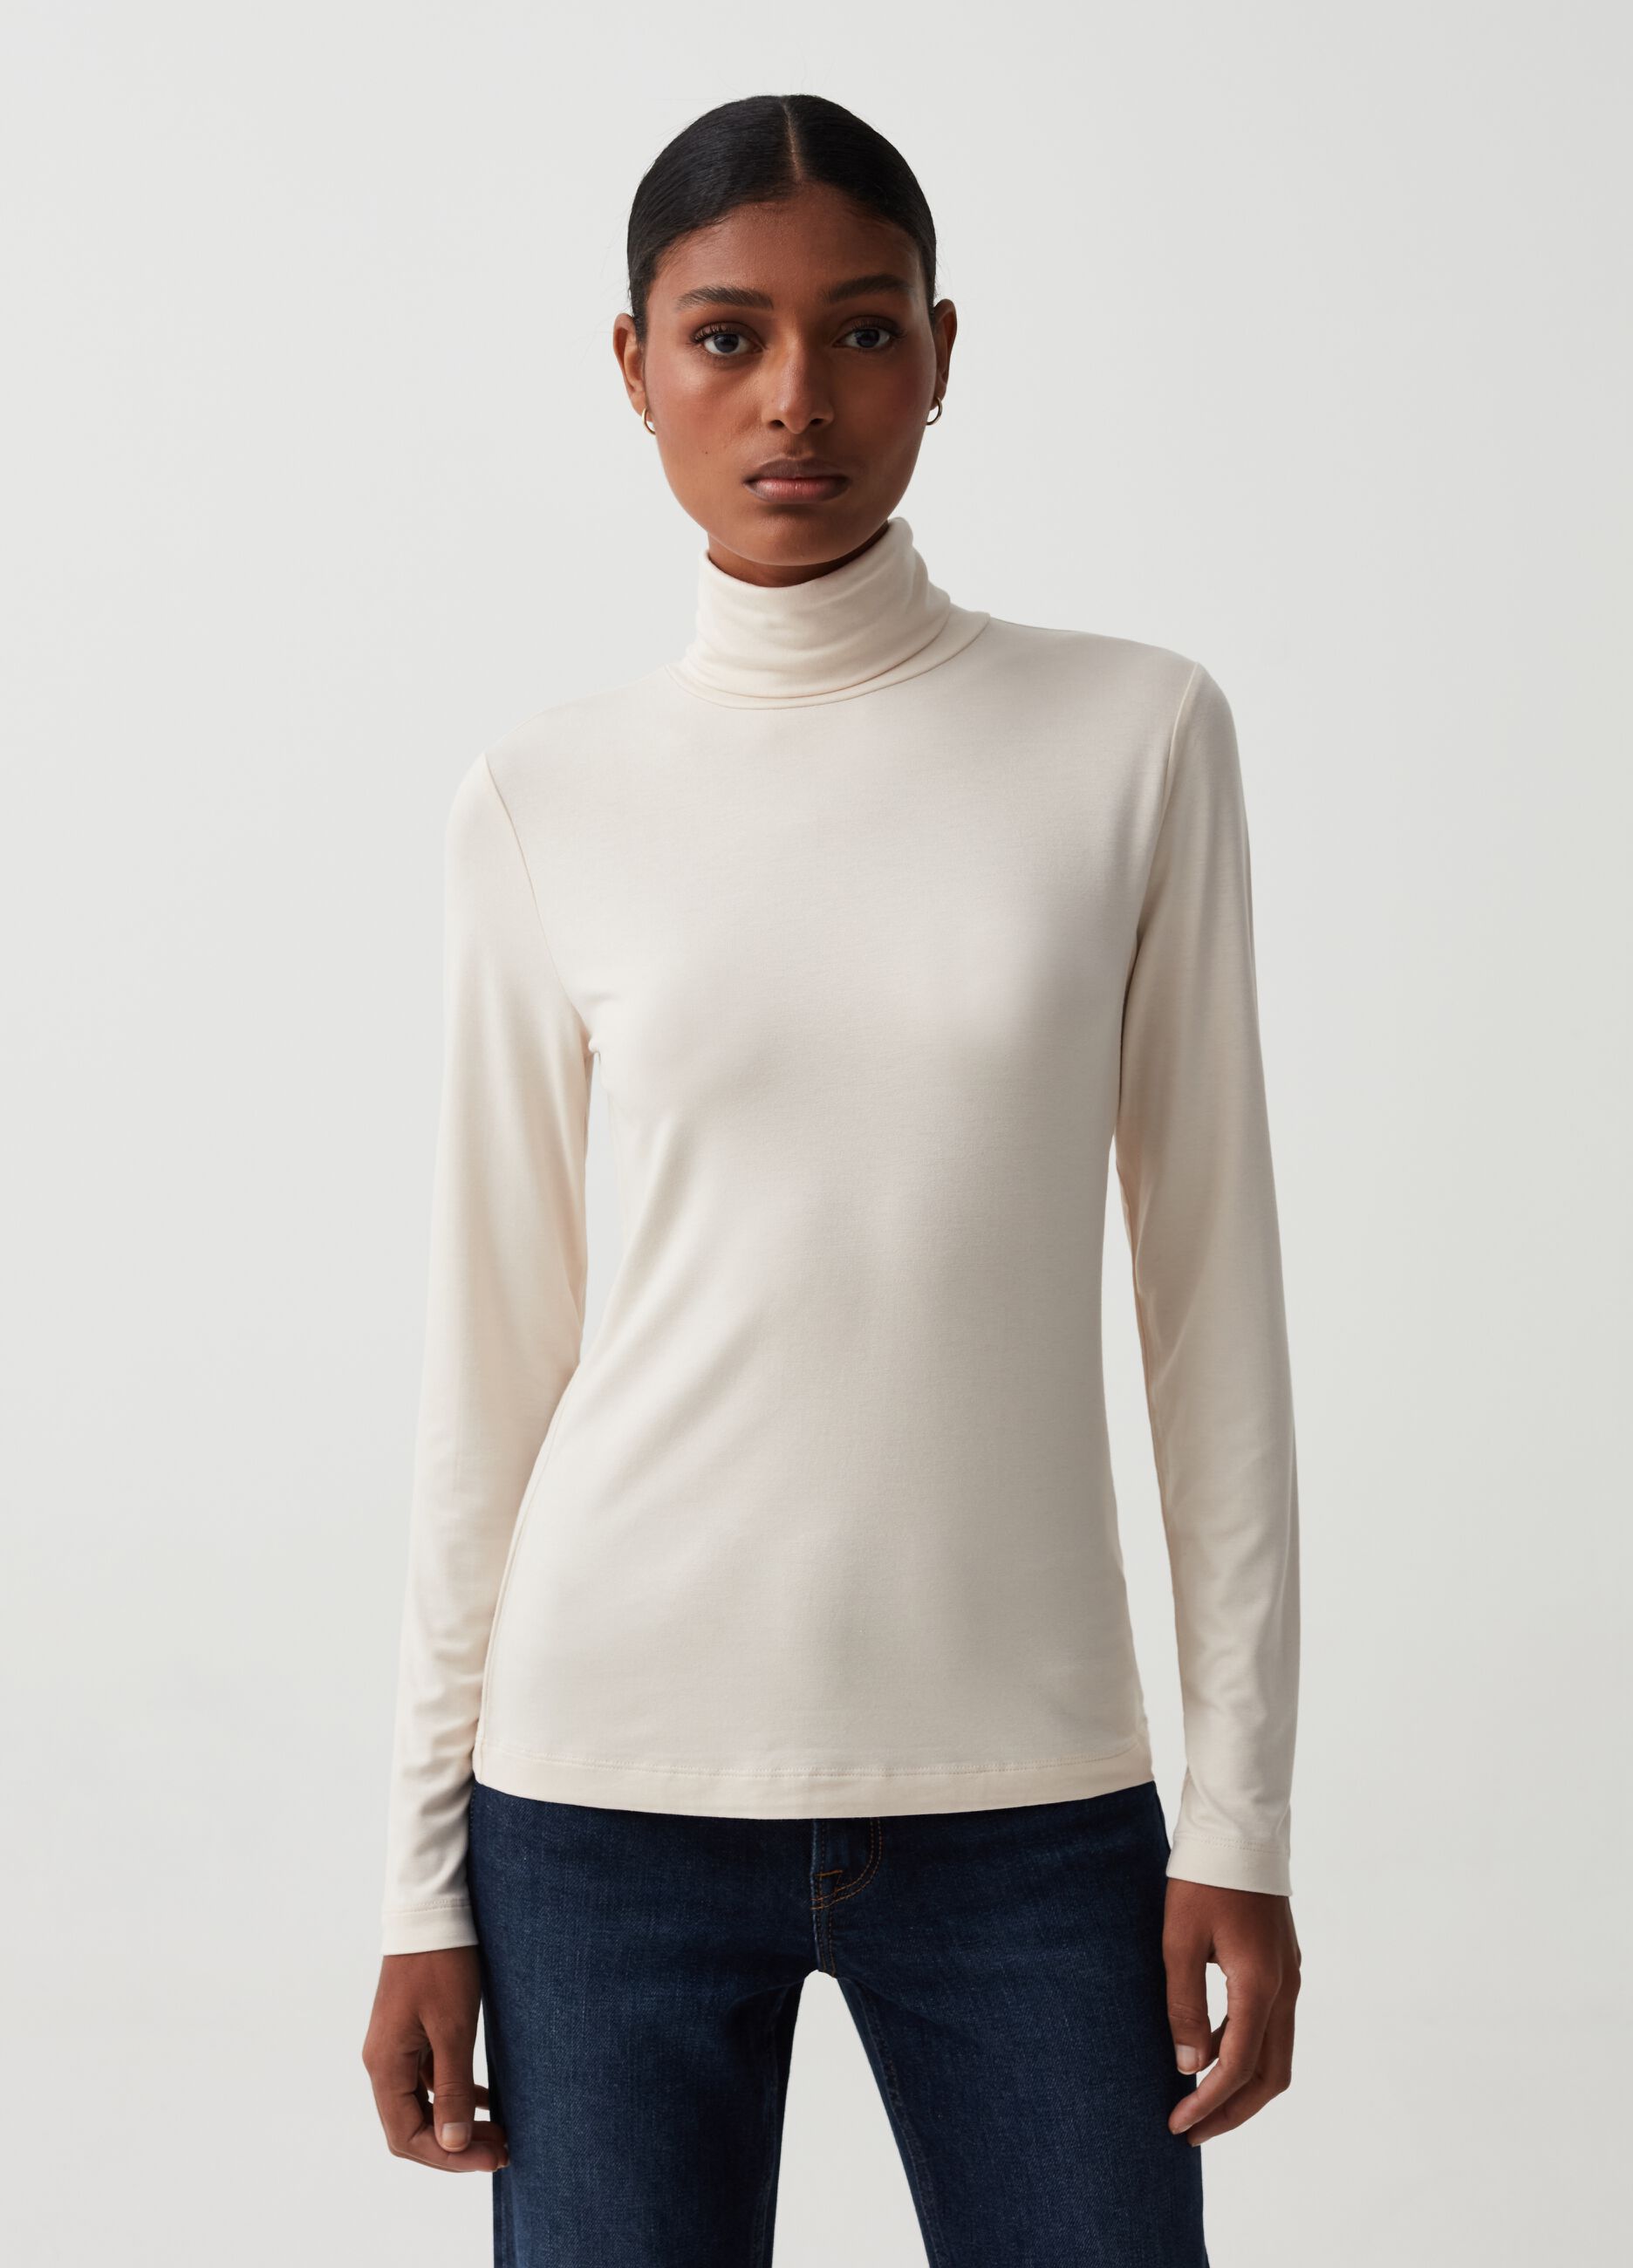 T-shirt with long sleeves and high neck